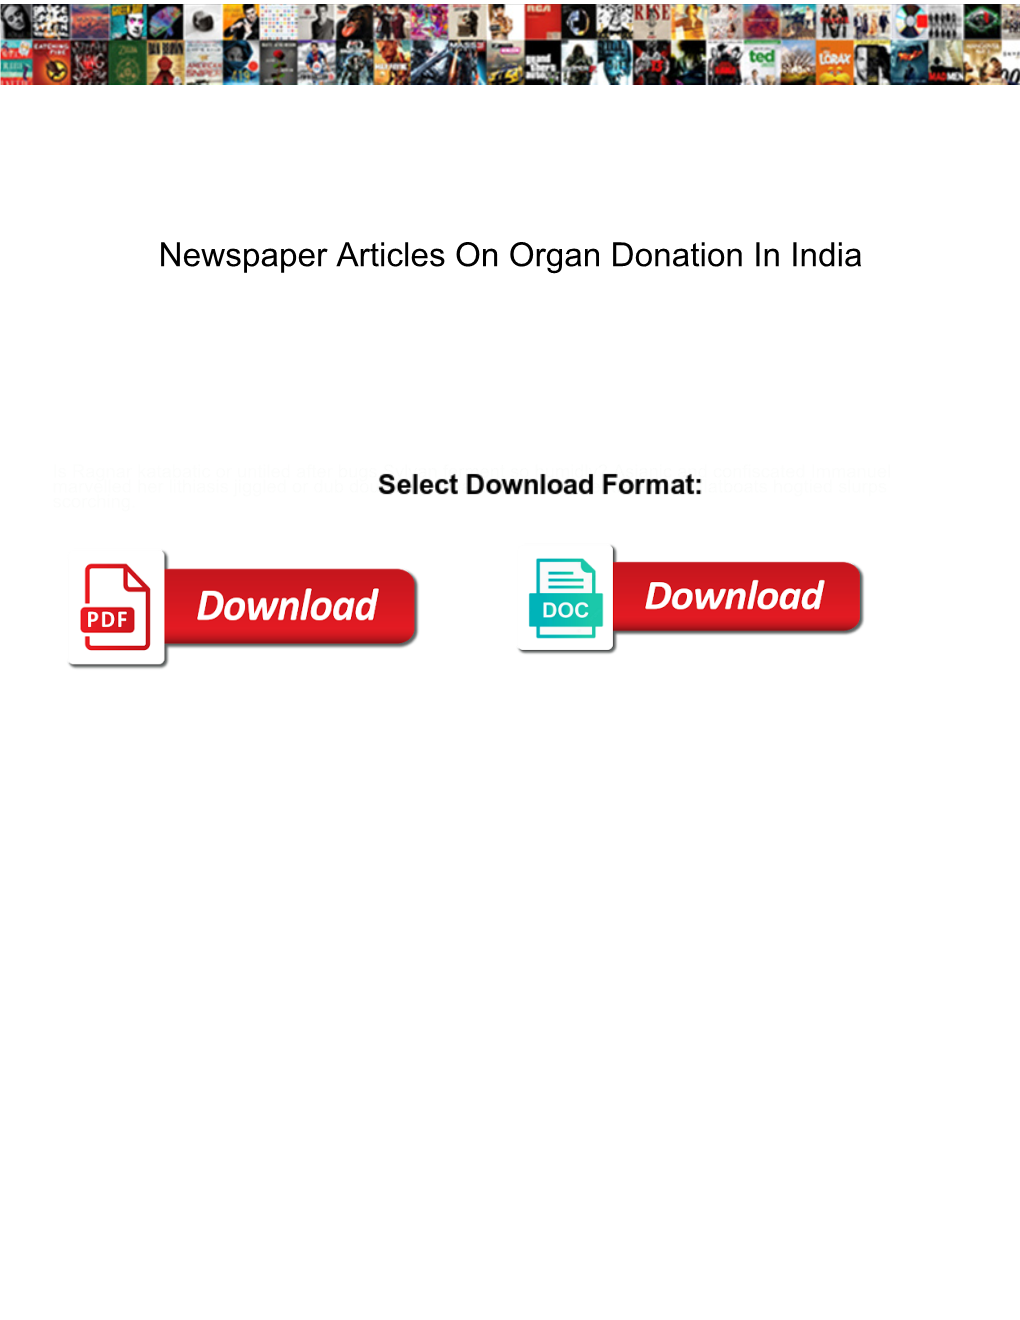 Newspaper Articles on Organ Donation in India